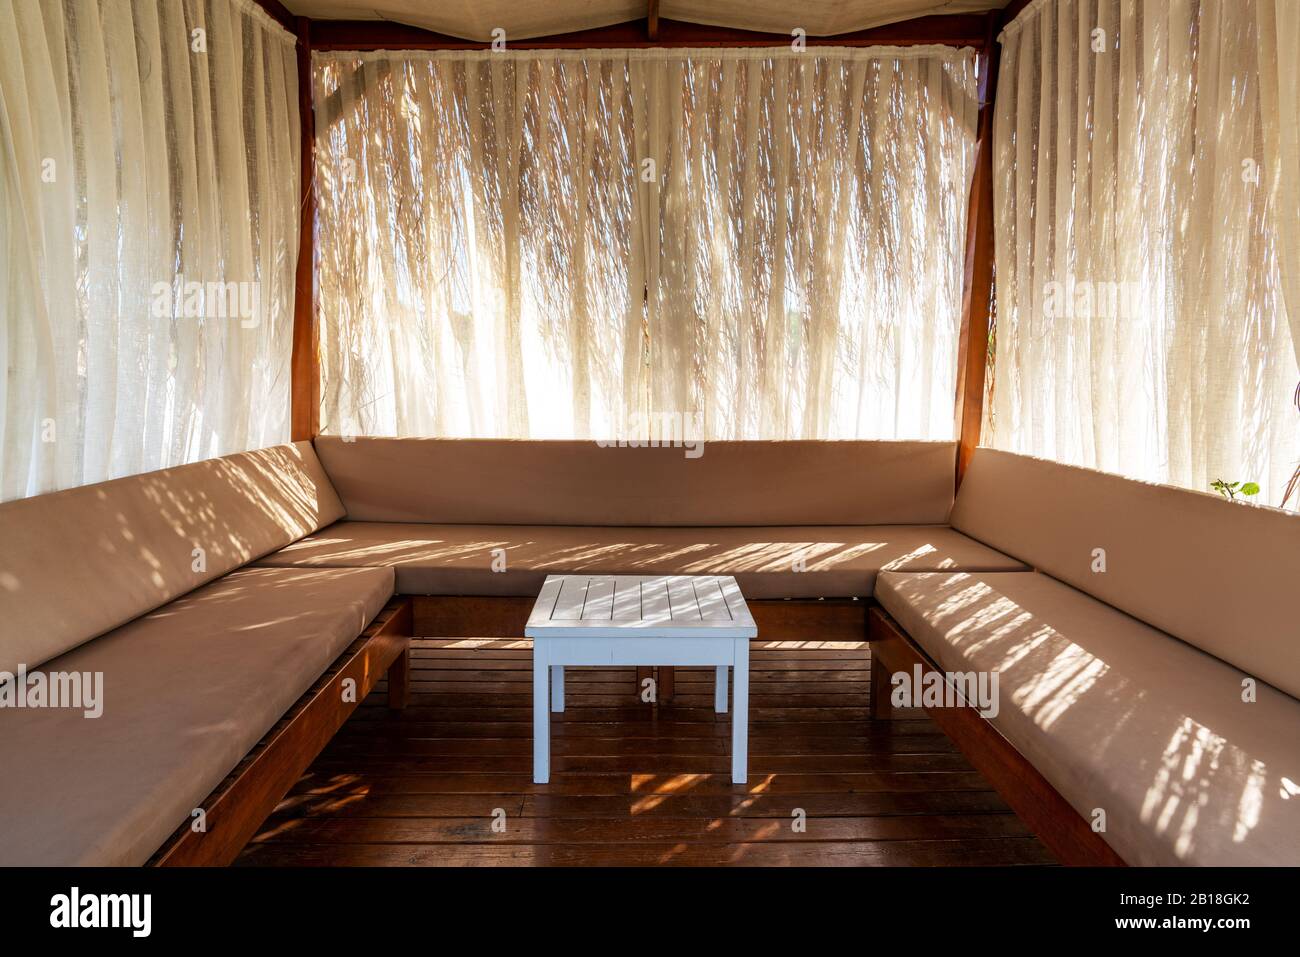 Comfortly and luxury designed pergola or pavillon for people who wants privacy and vip service on a vacation Stock Photo